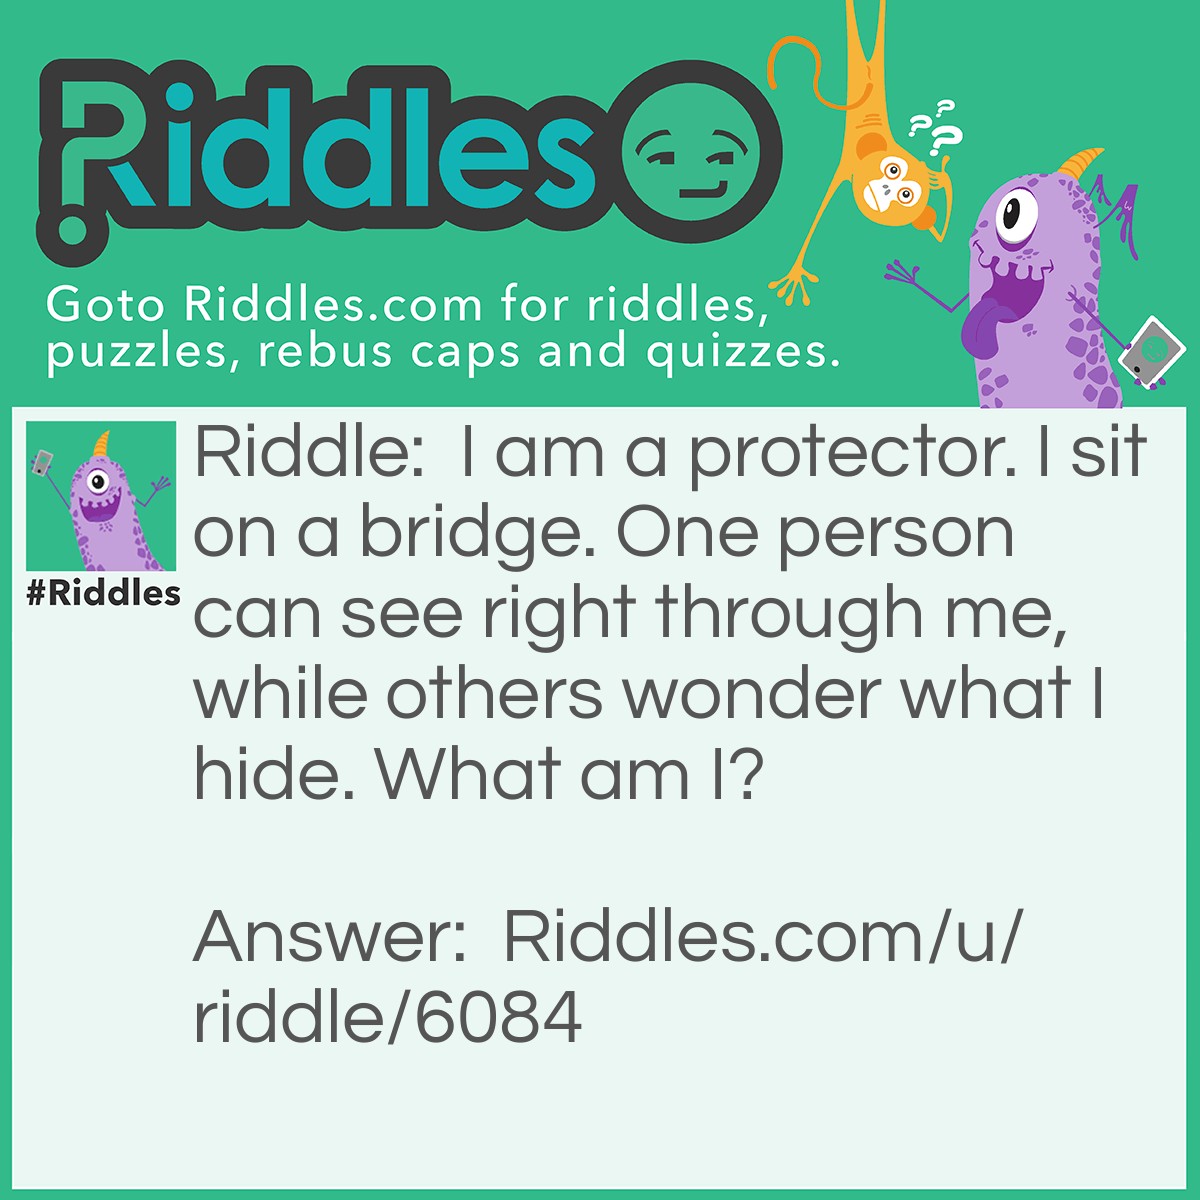 Riddle: I am a protector. I sit on a bridge. One person can see right through me, while others wonder what I hide. What am I? Answer: Sunglasses.